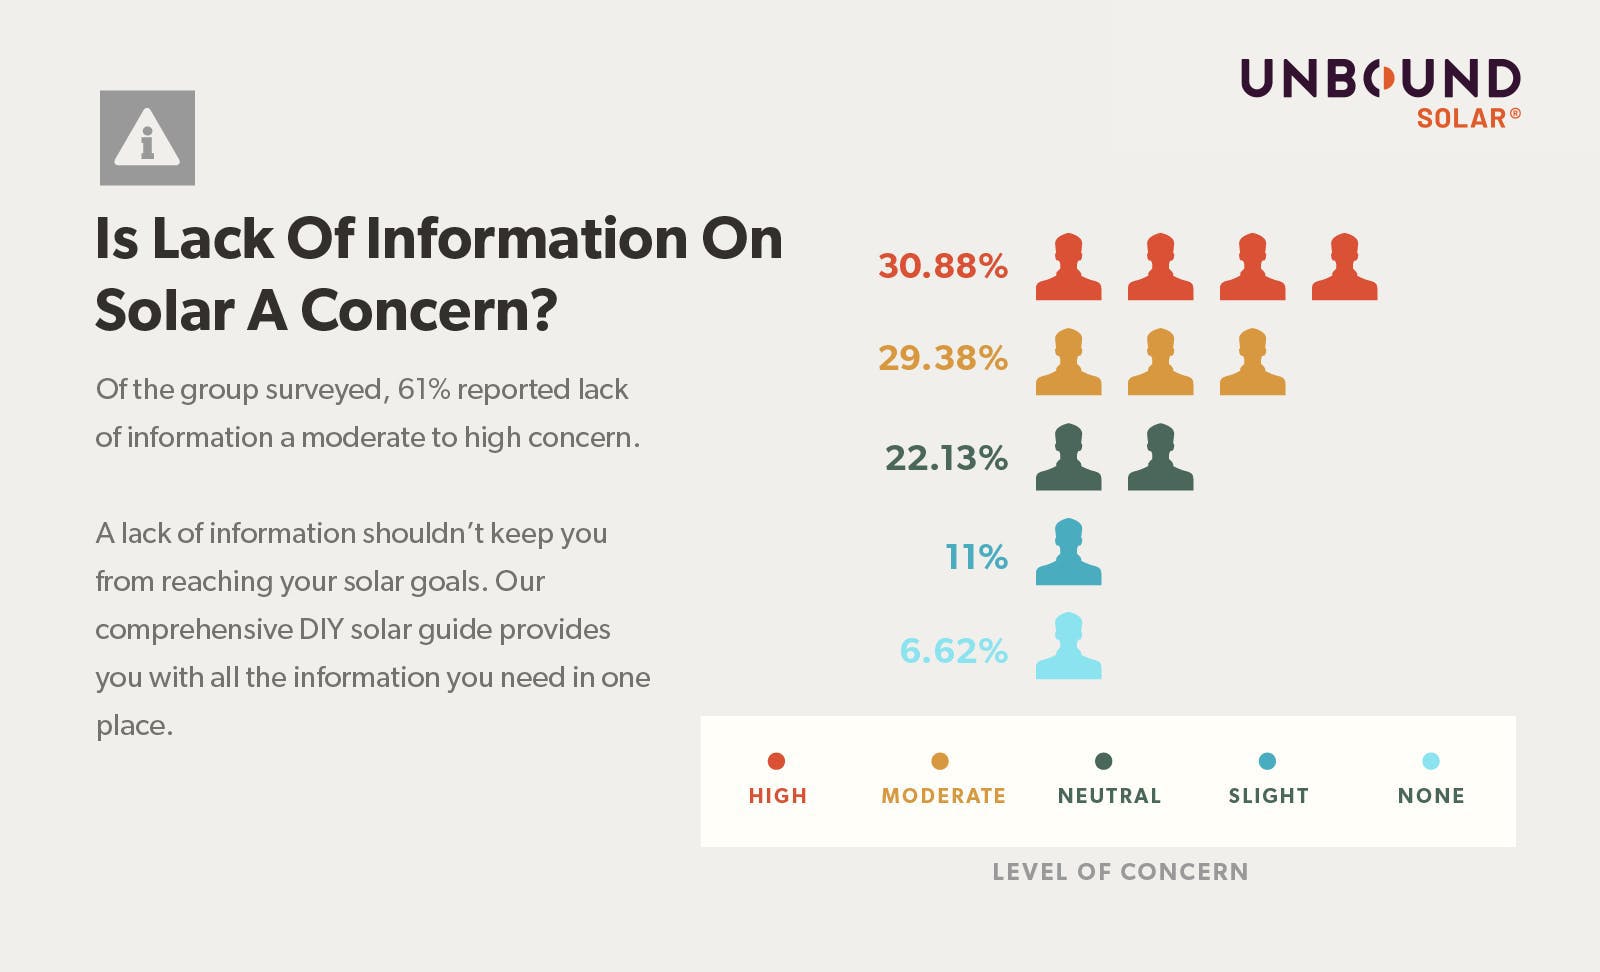 Image showing how many people surveyed listed a lack of information a concern with solar installation. 30.88% said it was a high concern, 29.38% said it was a moderate concern, 22.13% neutral, 11% slight concern, and 6.62% no concern.